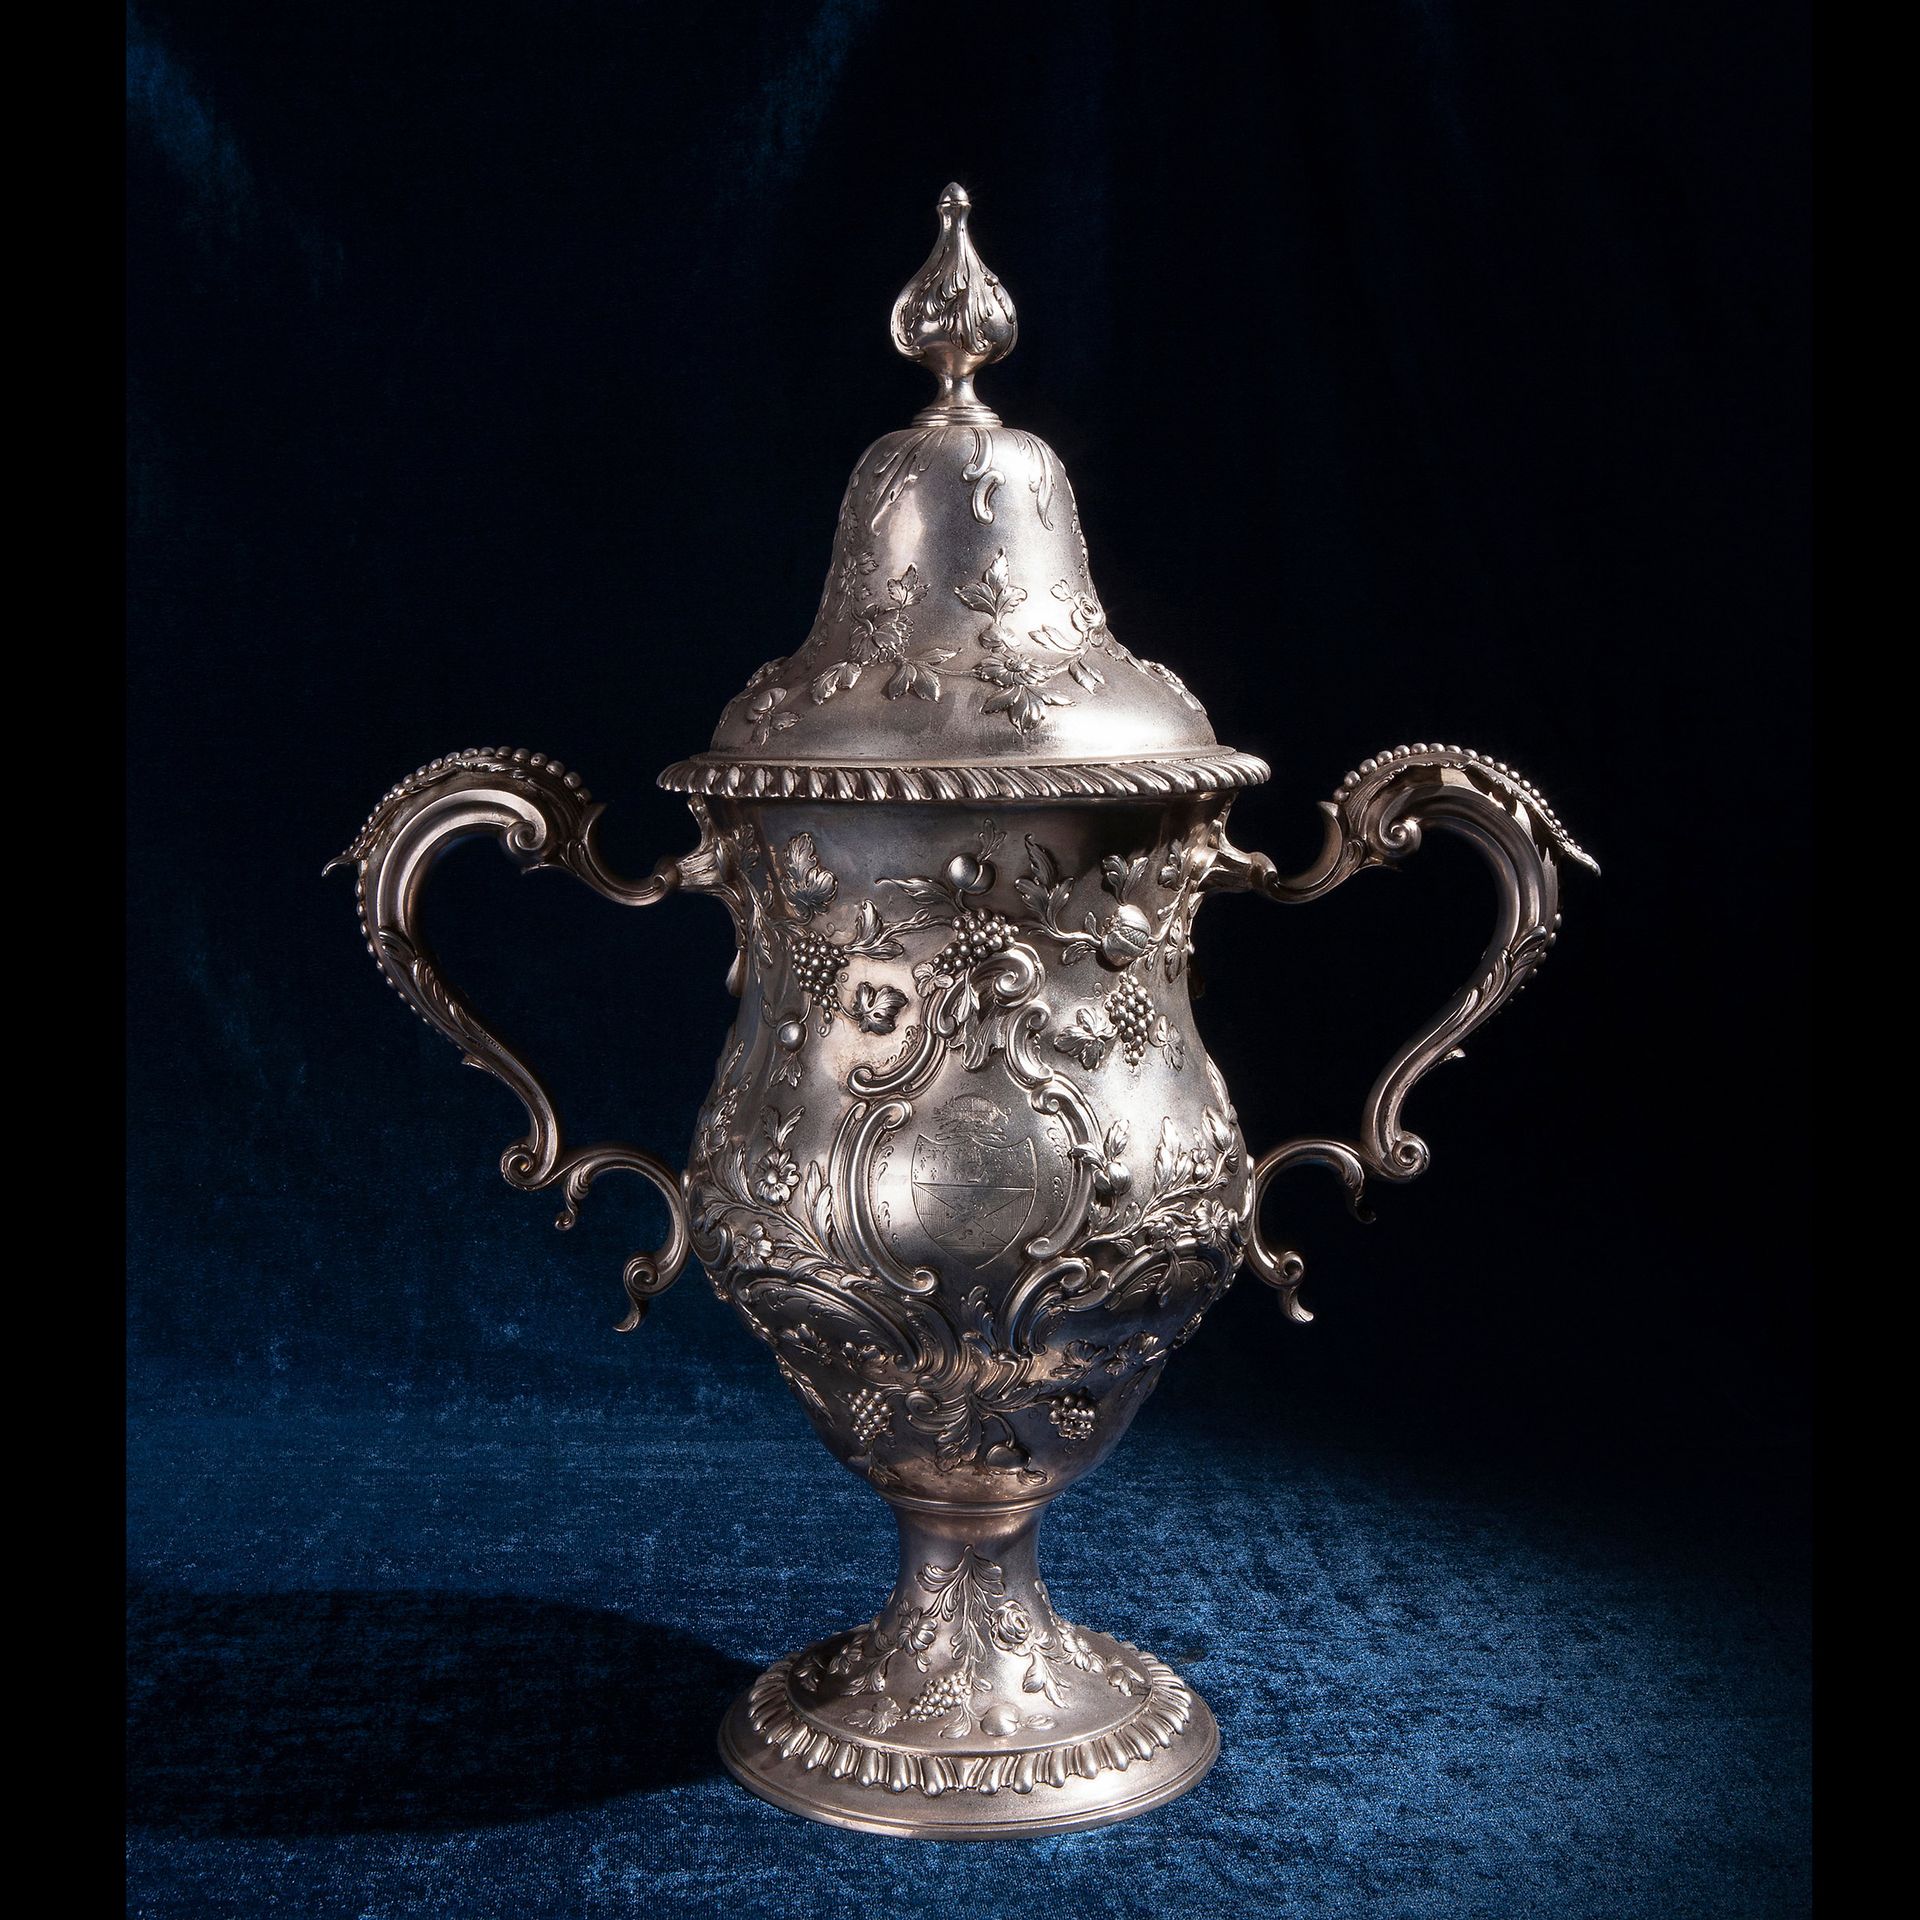 Silver two-handle cup with cover, London 1766 植物图案装饰，银器大师Louis Courtauld 总重量71.7&hellip;